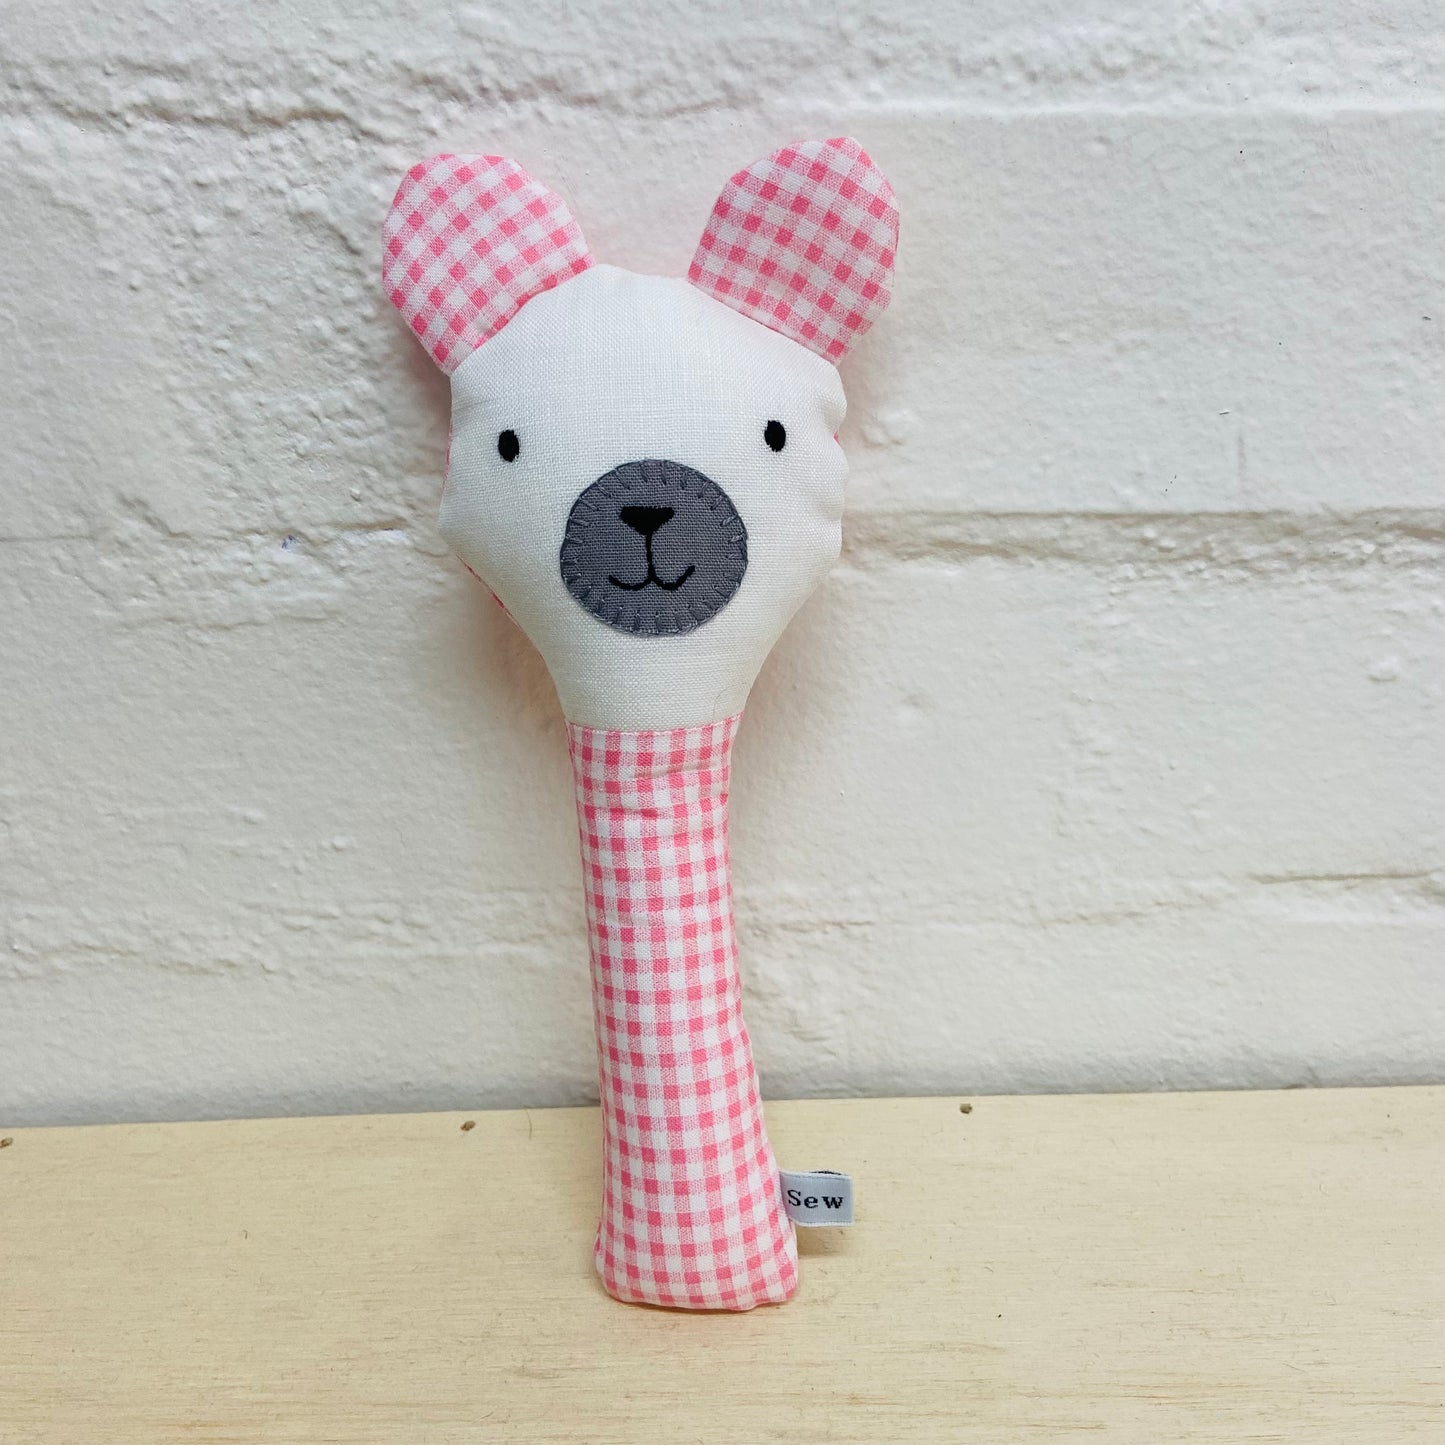 Baby Rattle by Sew Anna